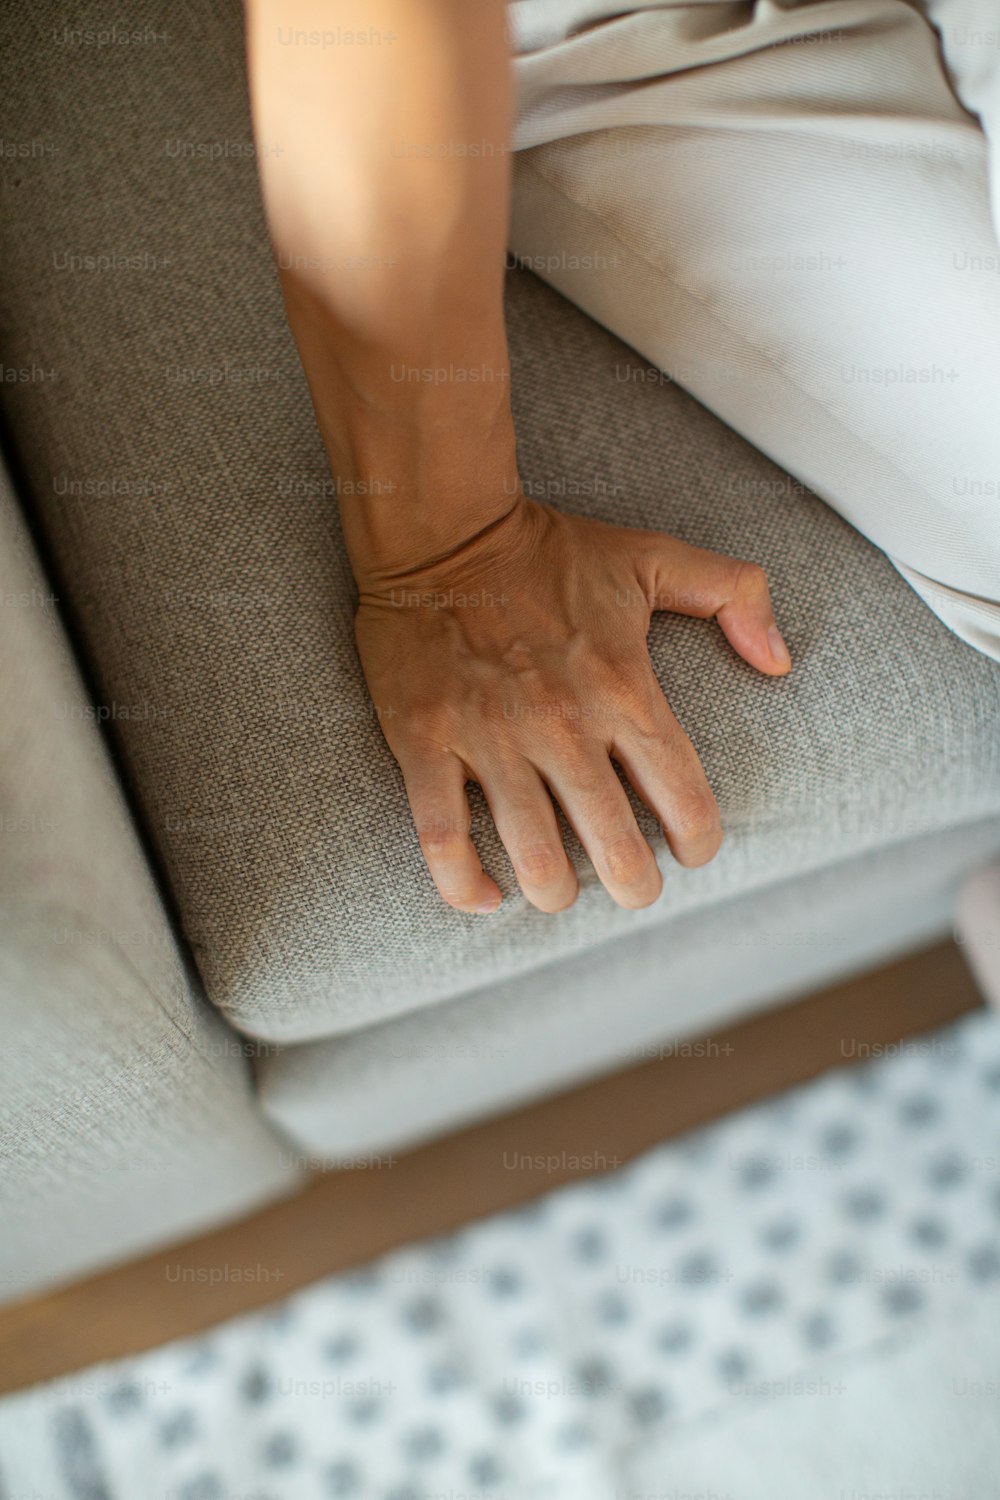 a person sitting on a couch with their hand on the back of the couch